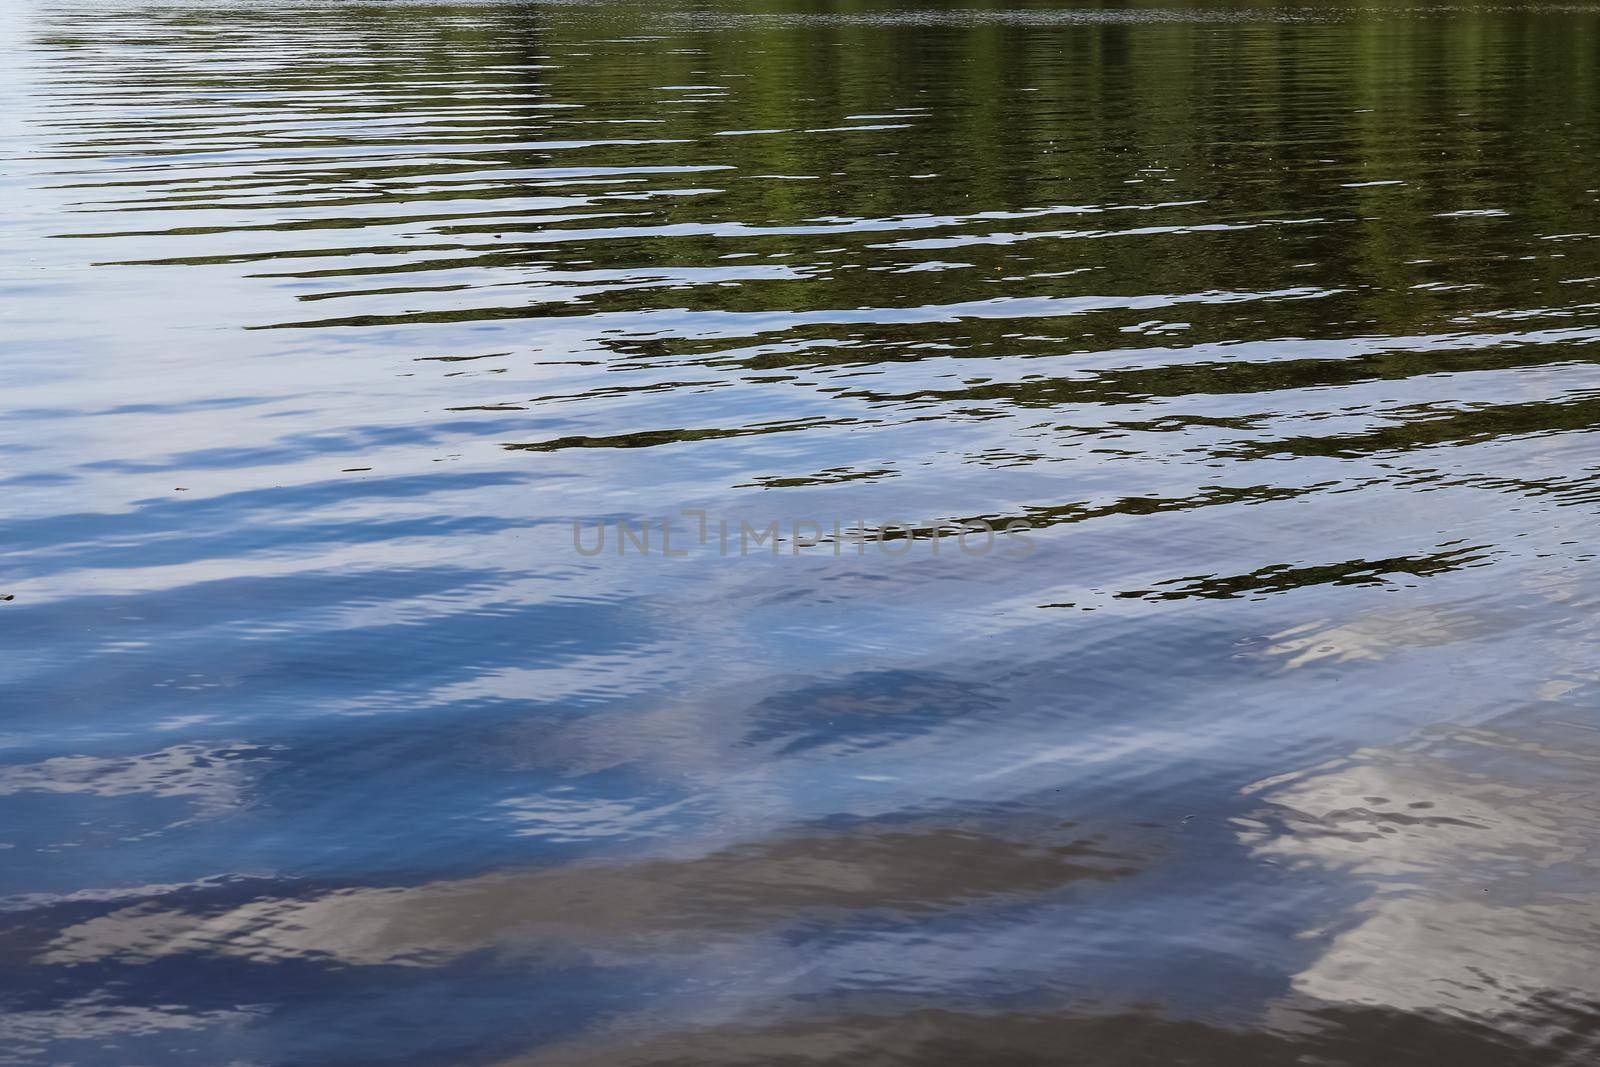 Water surfaces with waves and ripples and the sunlight reflecting at the surface